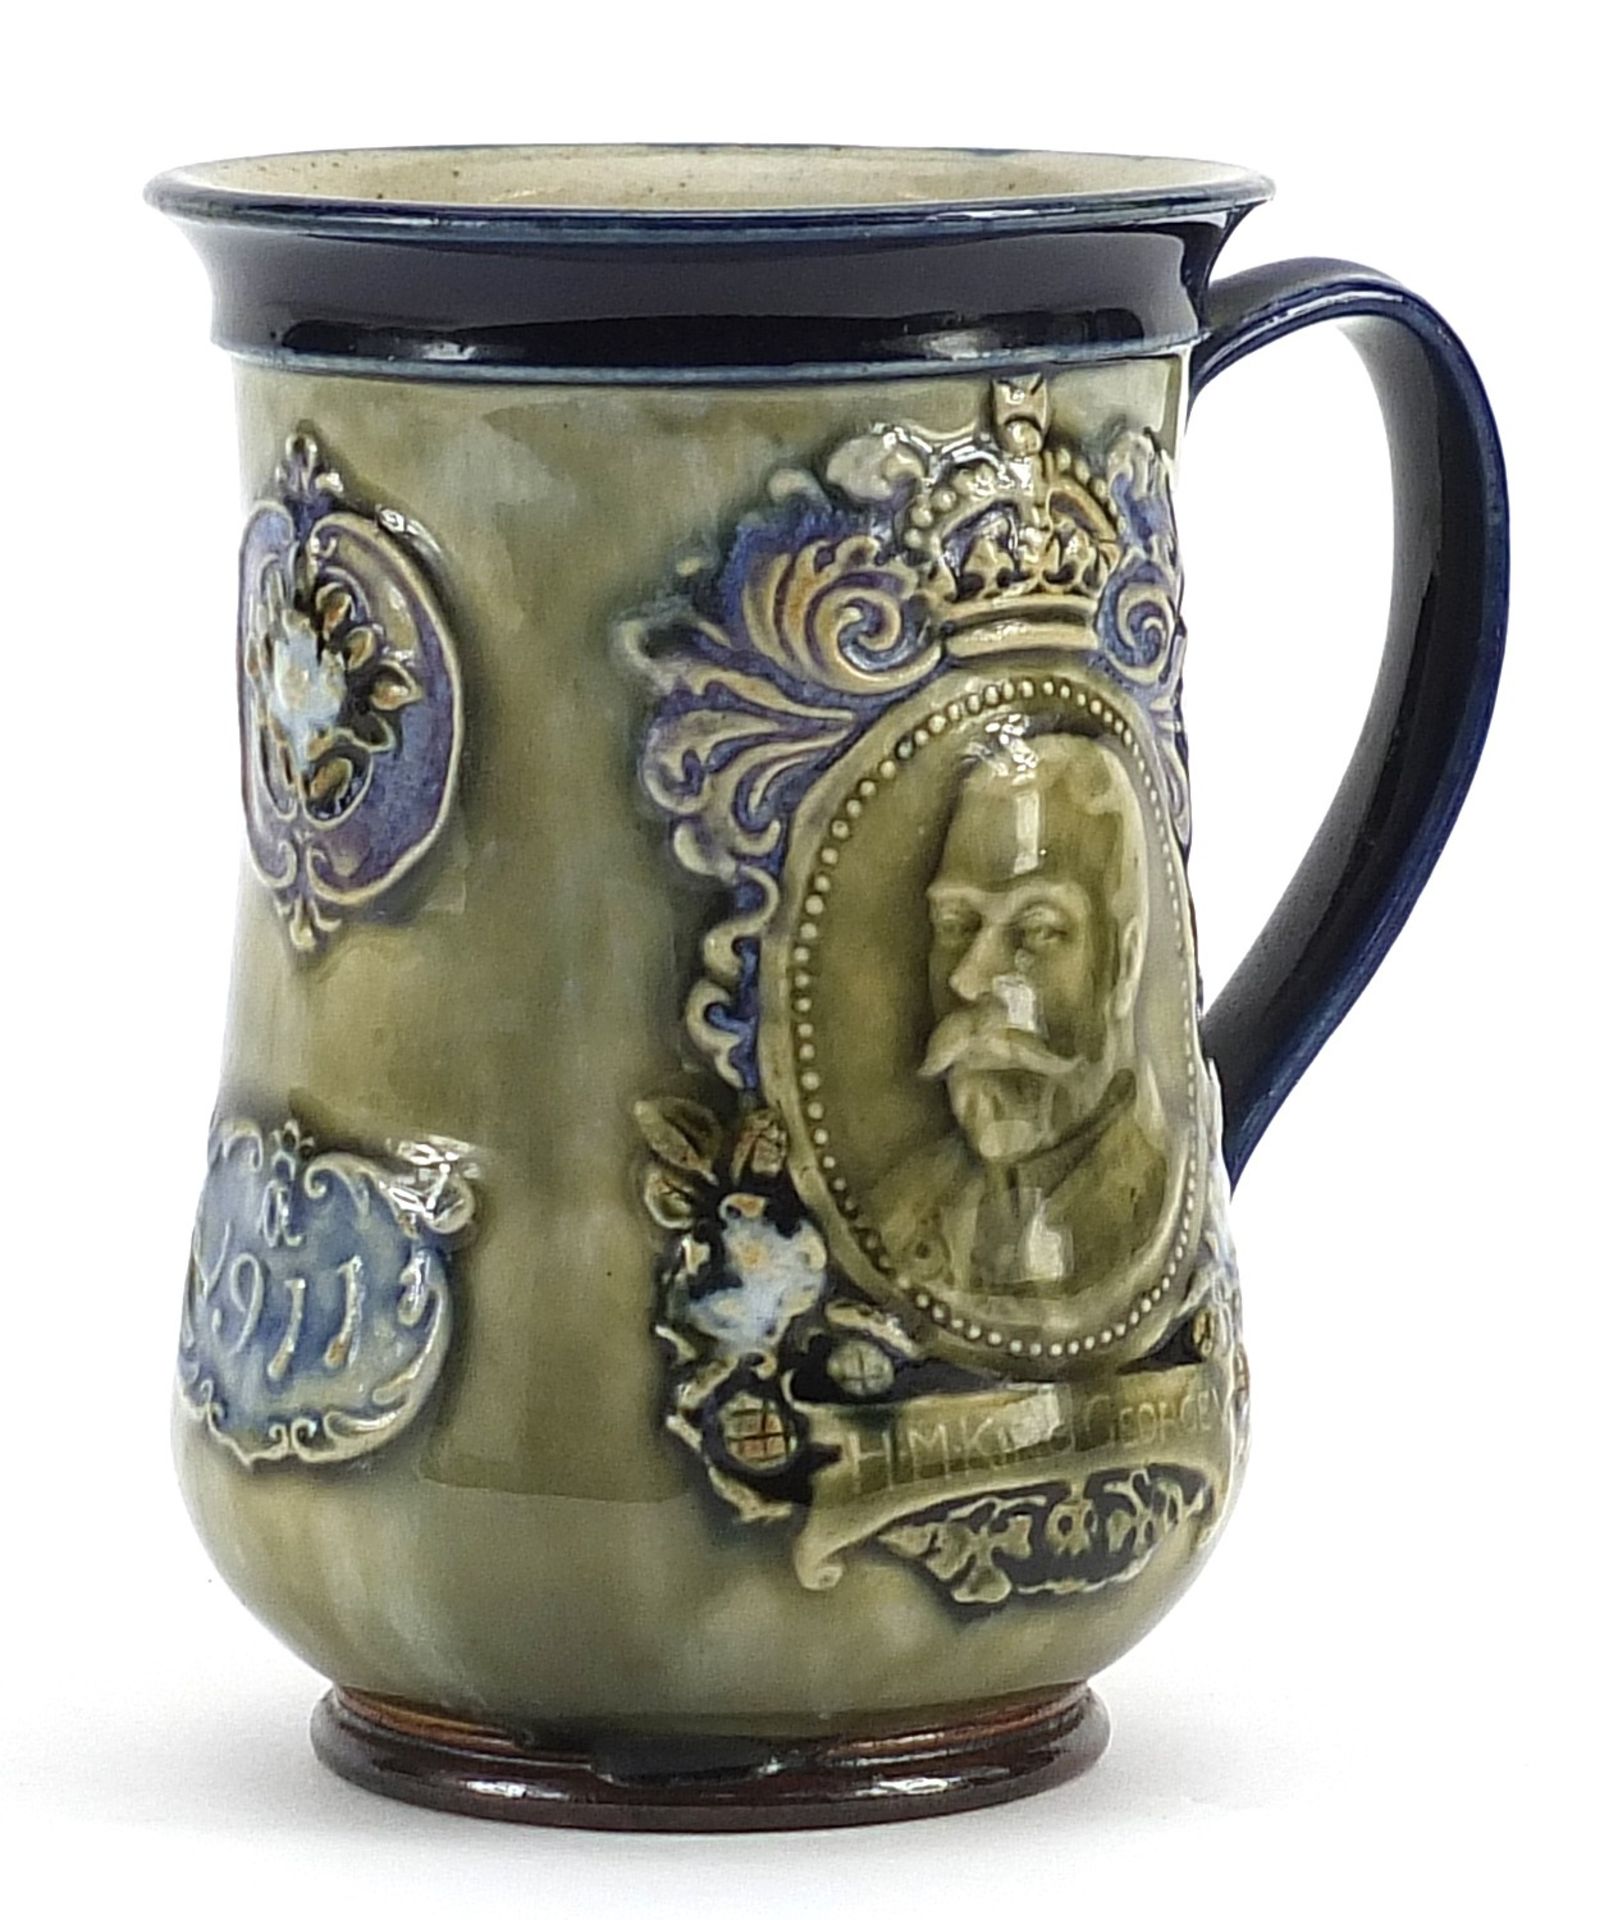 Royal Doulton stoneware mug commemorating the coronation of HM Queen Mary and HM King George V 1911,